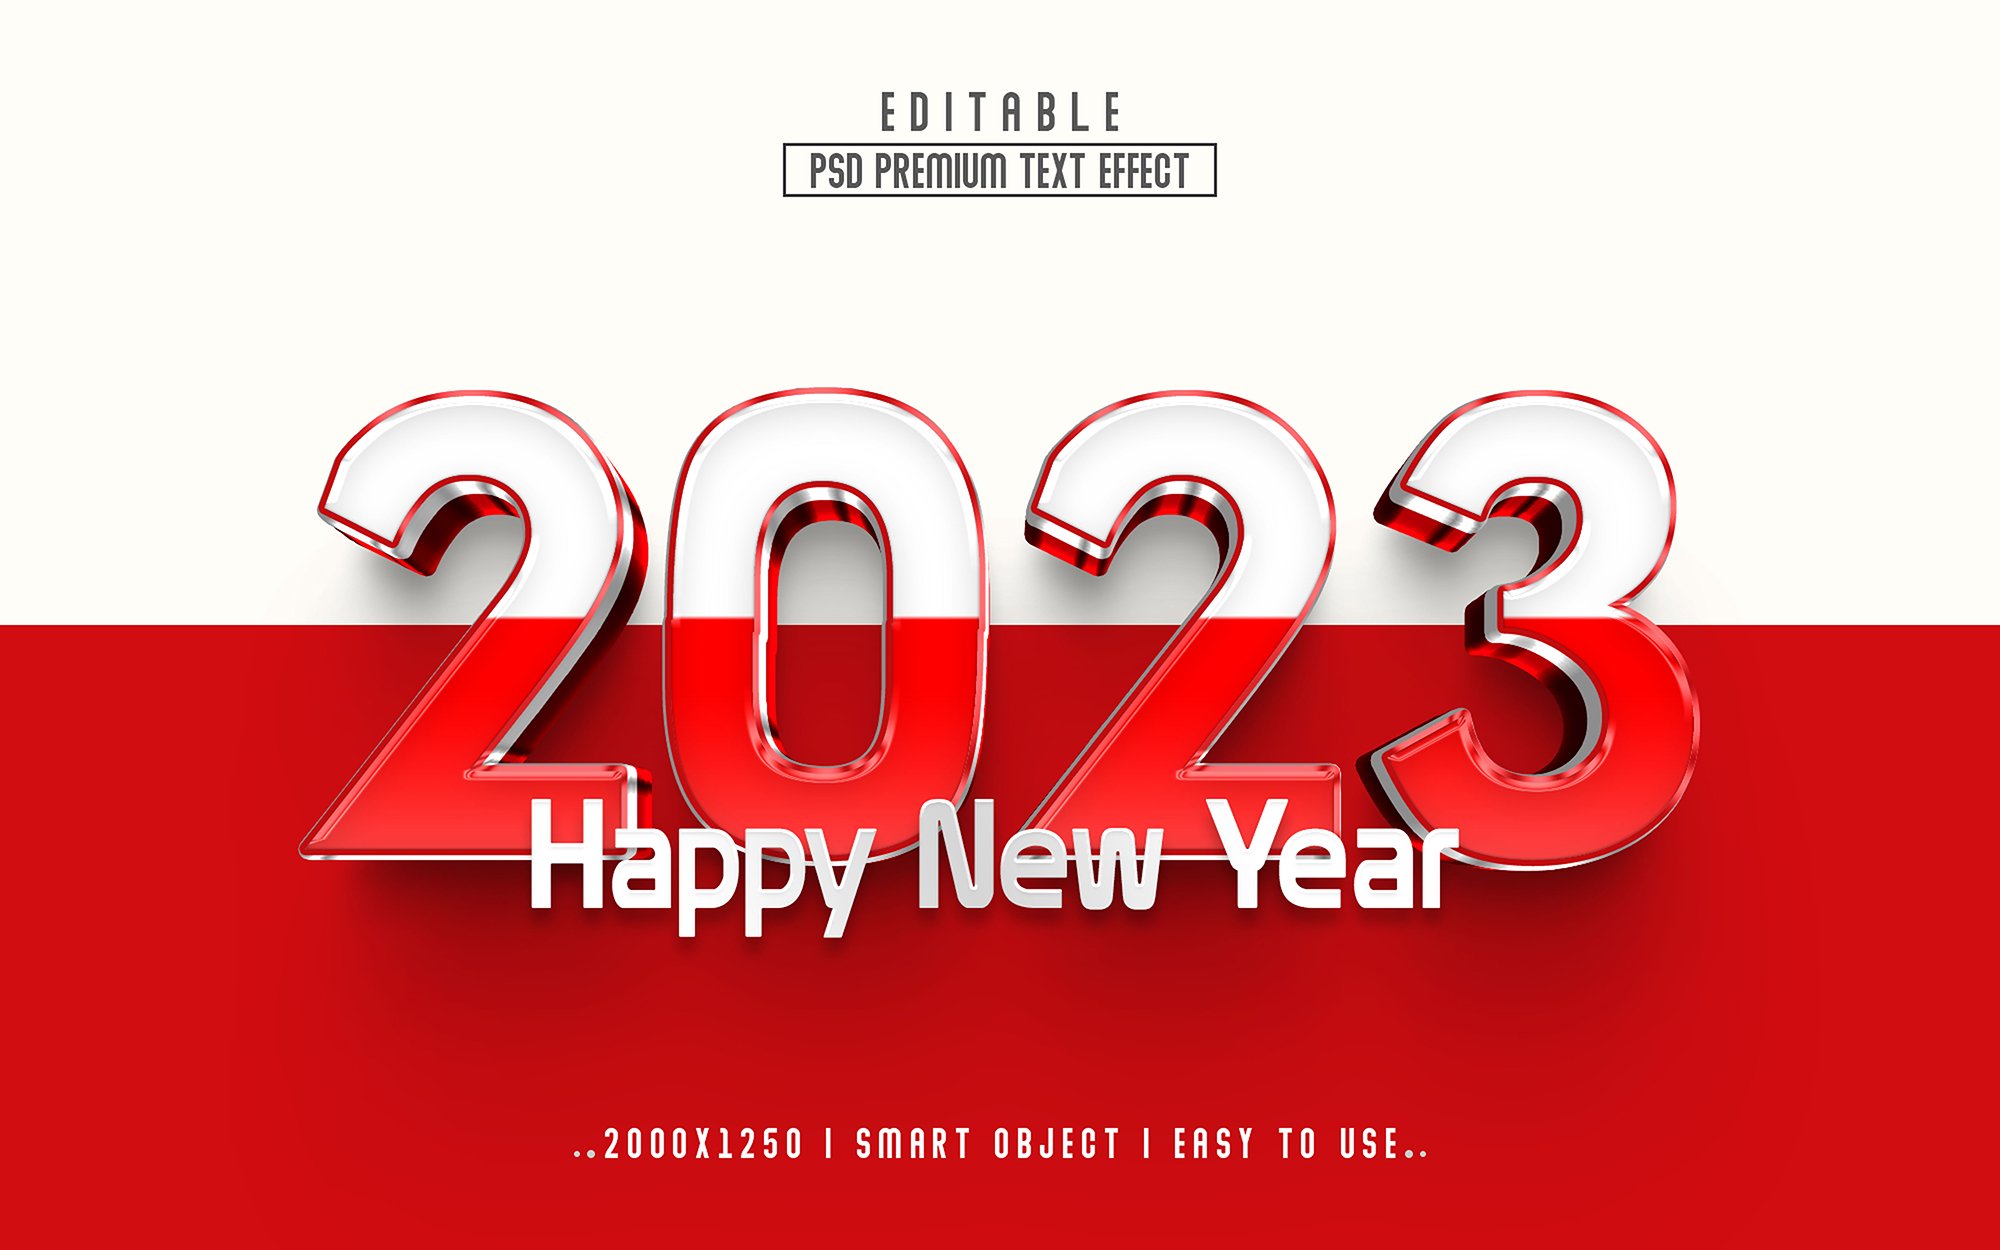 Happy new year 2023 3D text effectcover image.